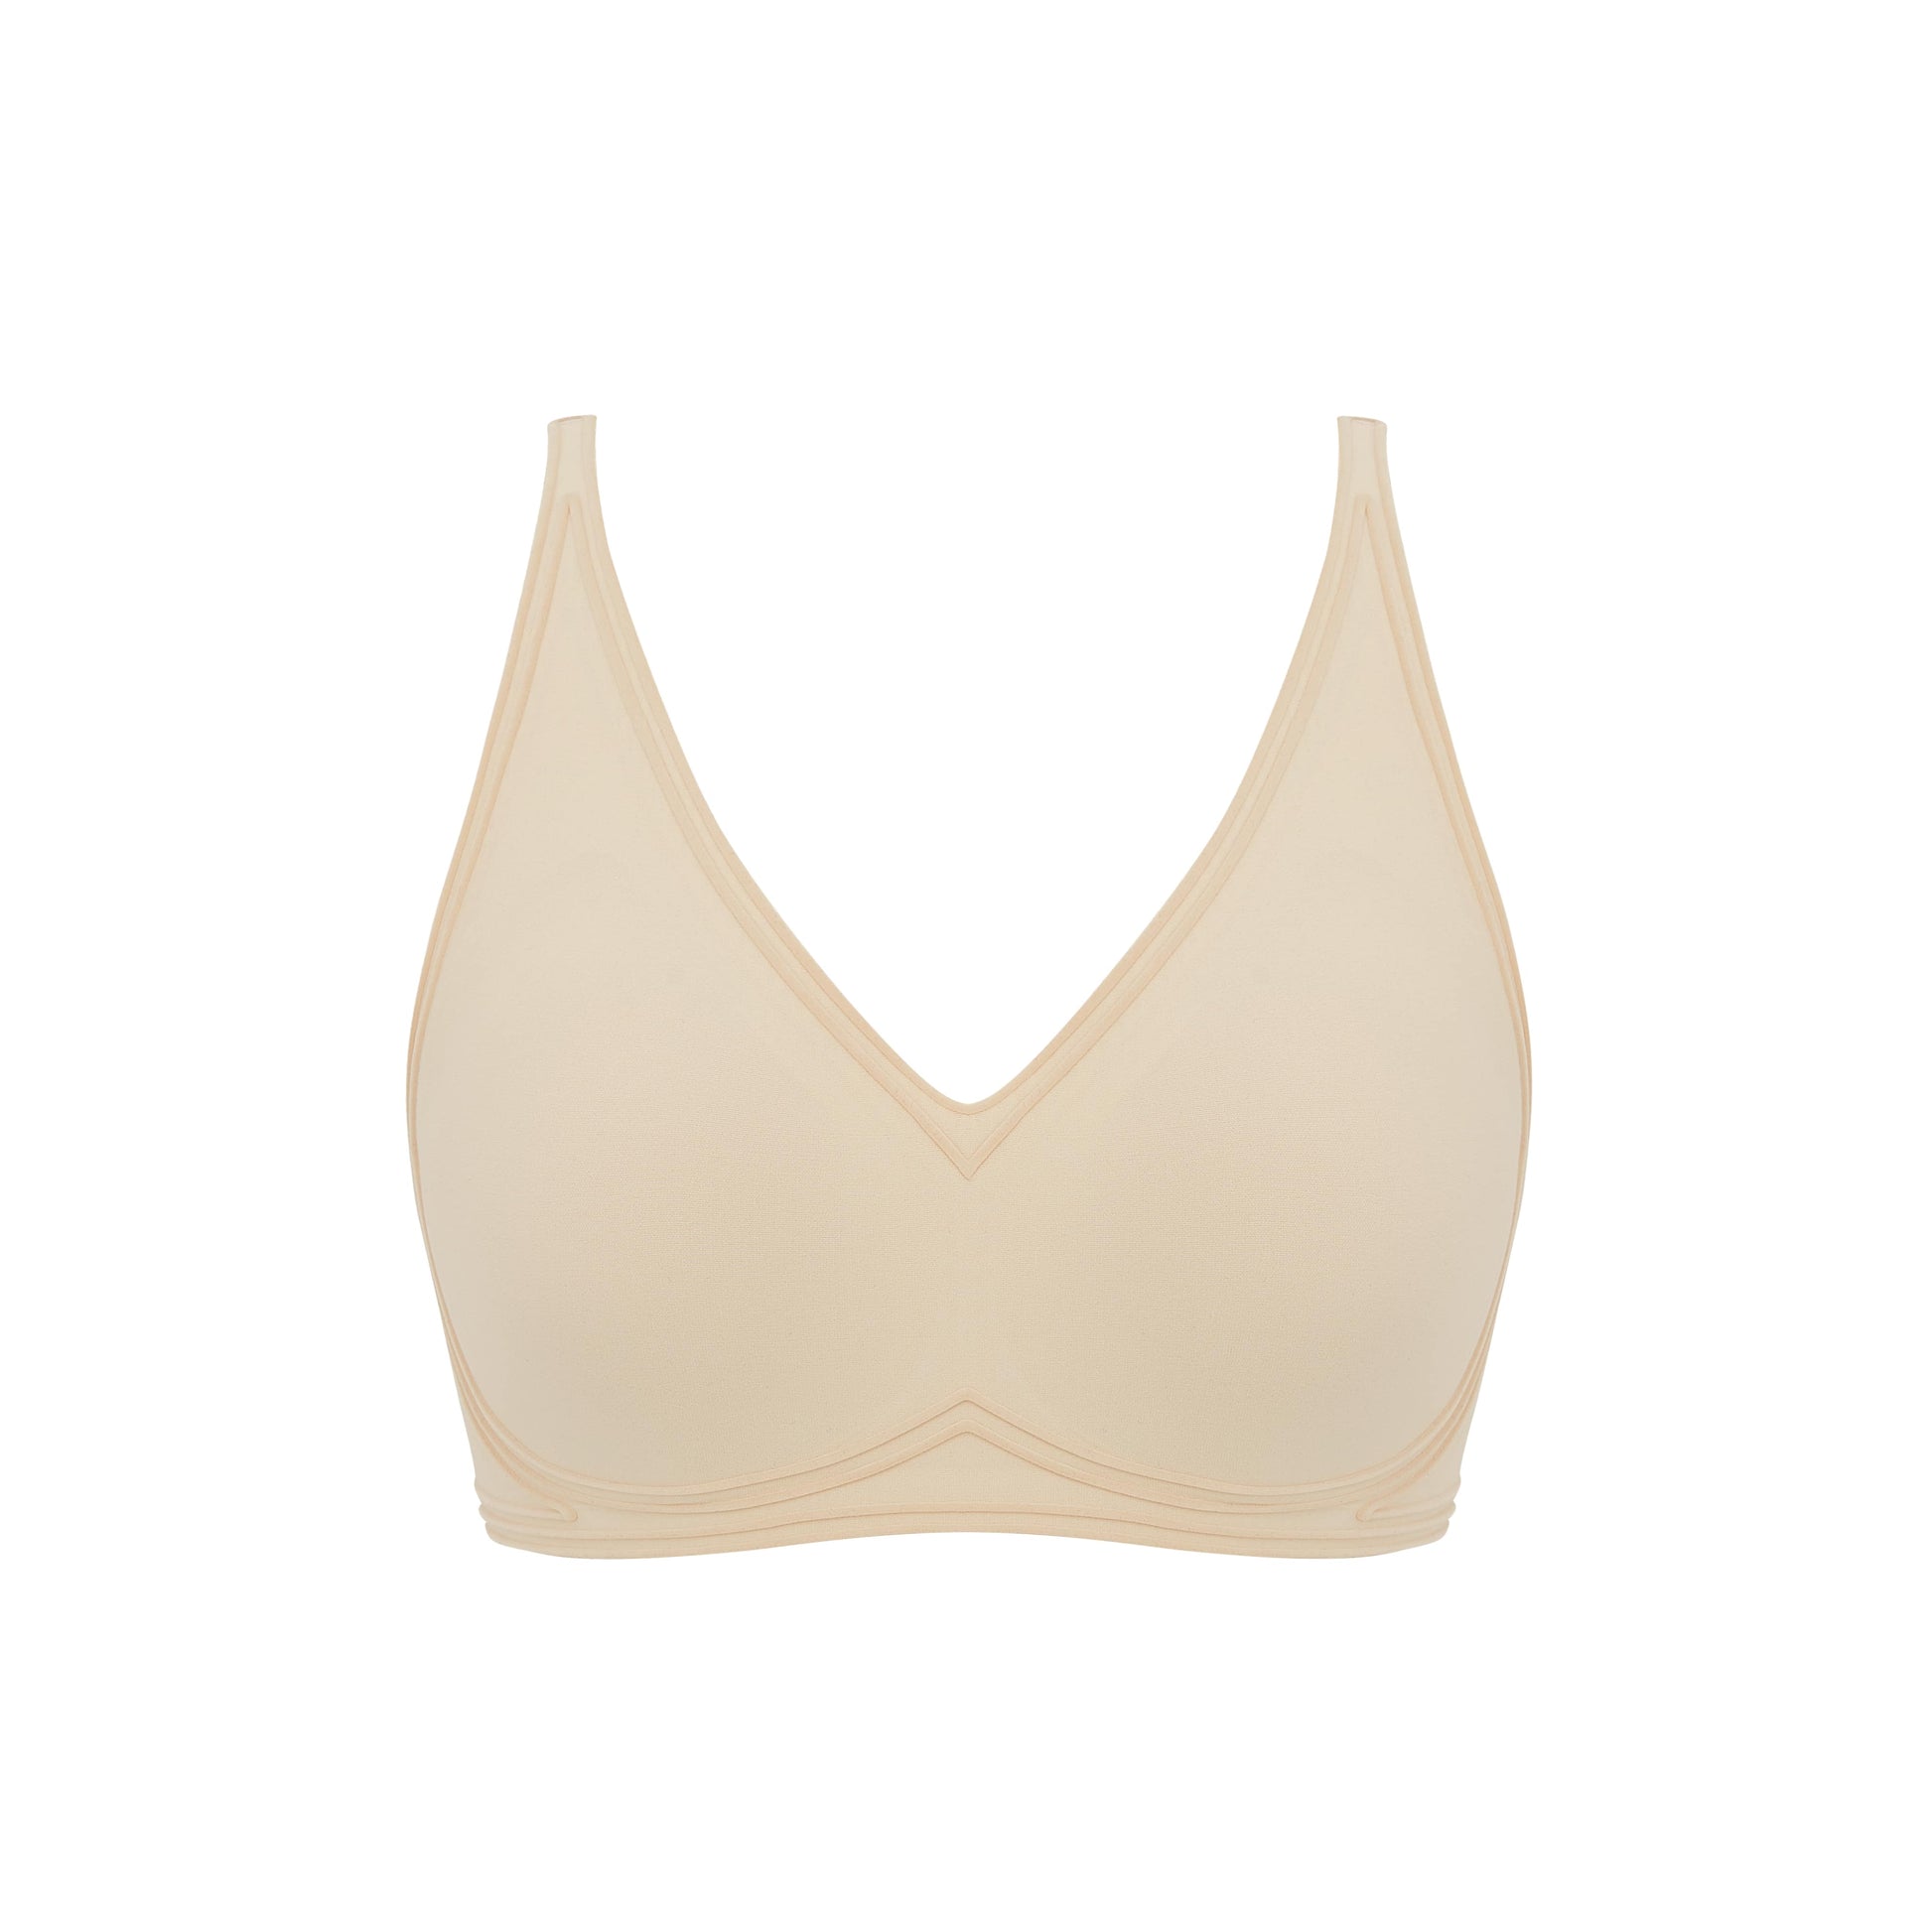 SB034 CLIP BRA LATEX 3D SUPPORT PUSH UP CUP SEAMLESS BREATHABLE COMFY SPORT BRA  WIRELESS ANTI SAG WOMEN LADIES BRAS WHITE S 30-40KG